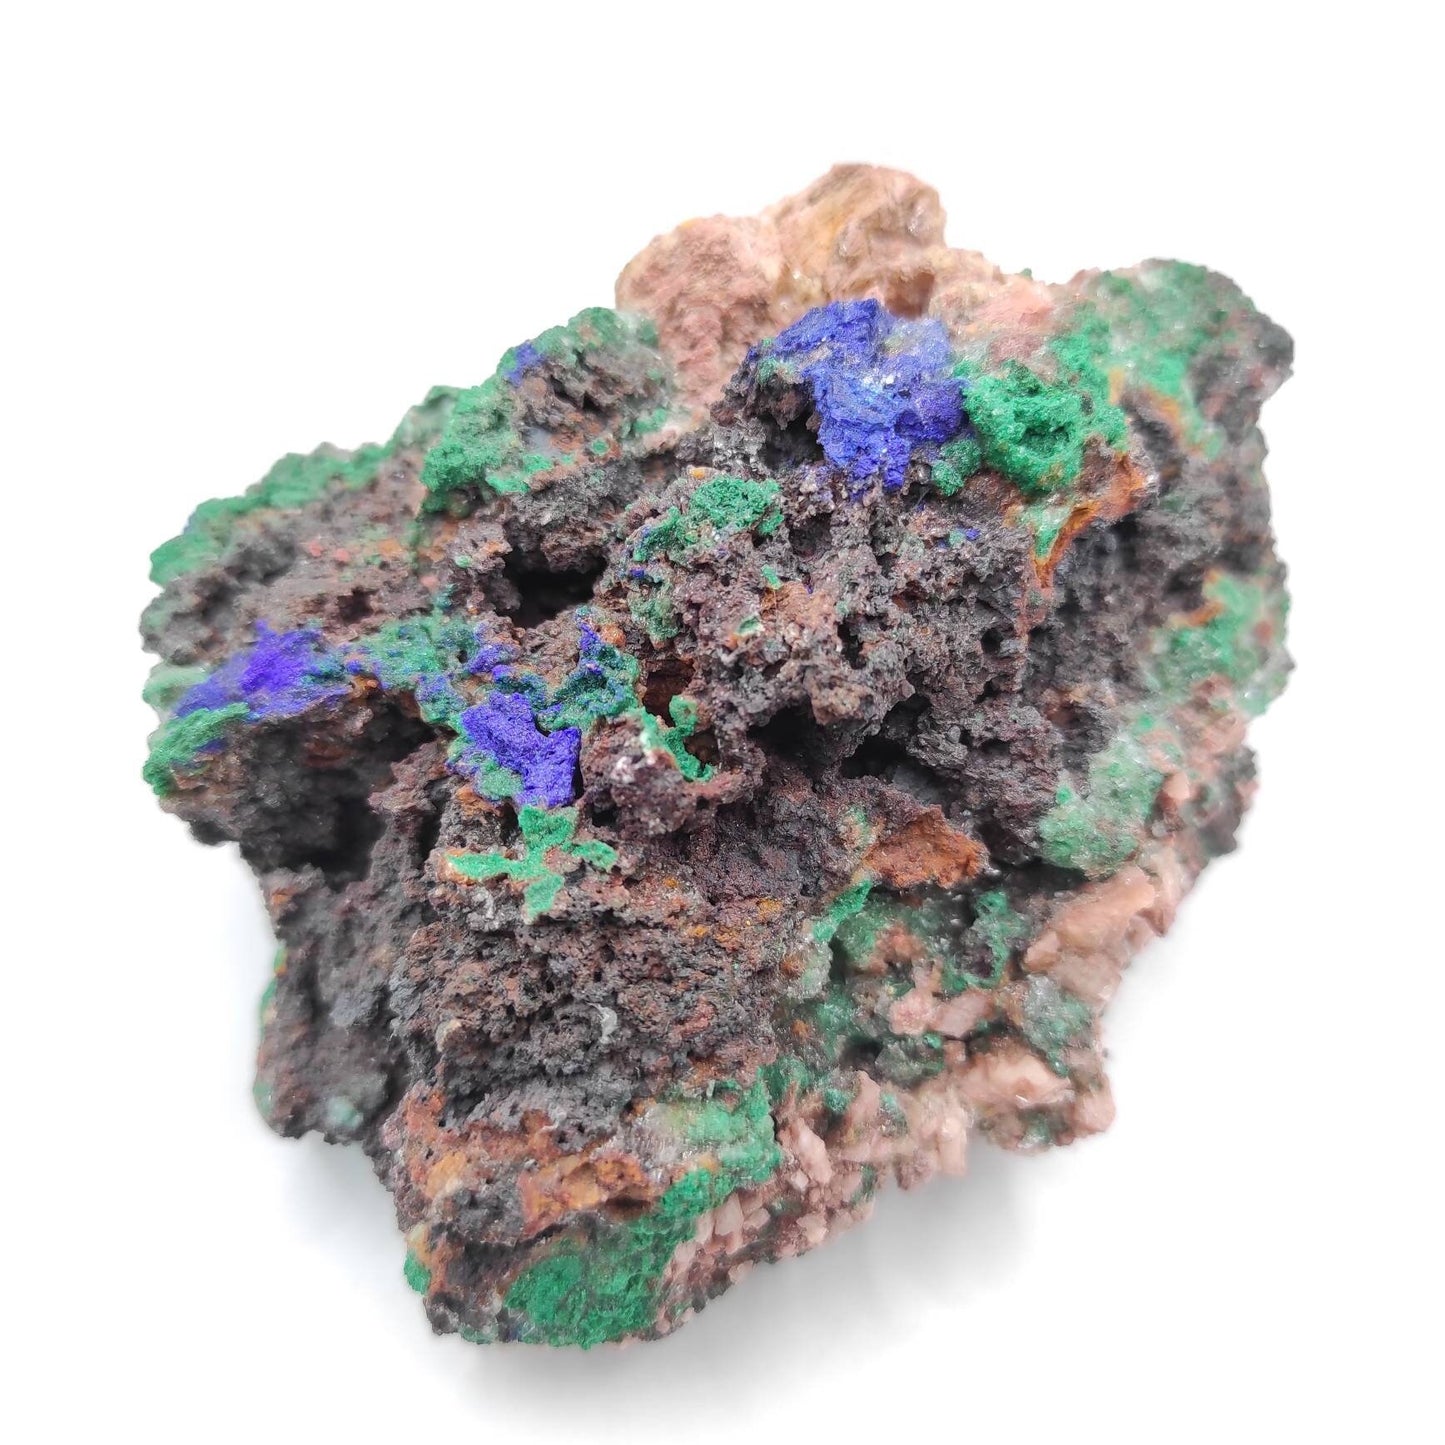 450g - Azurite and Malachite with Pink Dolomite Crystal Specimen - Blue Azurite and Malachite from Sidi Ayad, Morocco - Raw Azurite Mineral